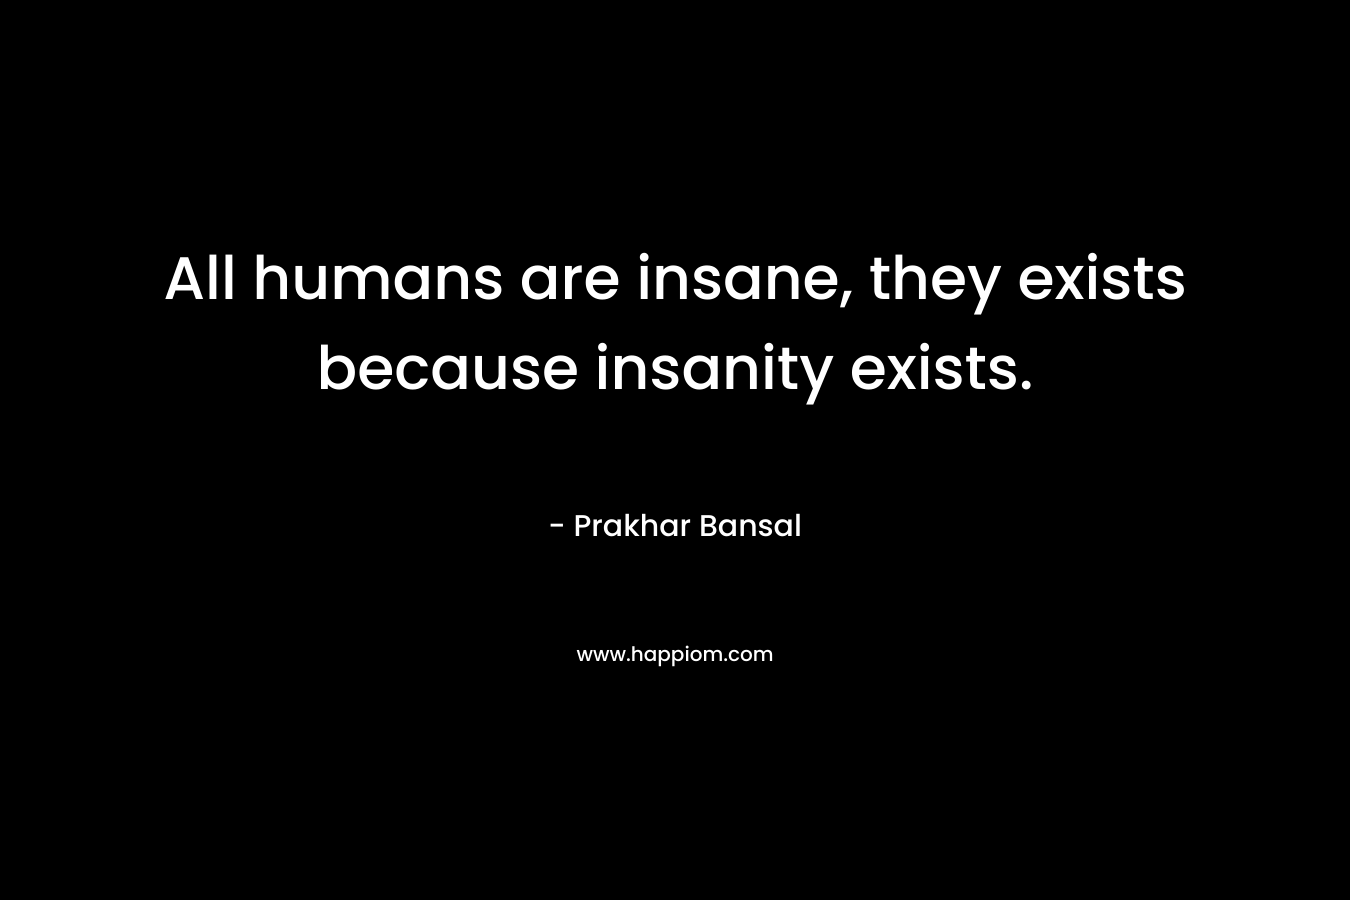 All humans are insane, they exists because insanity exists.